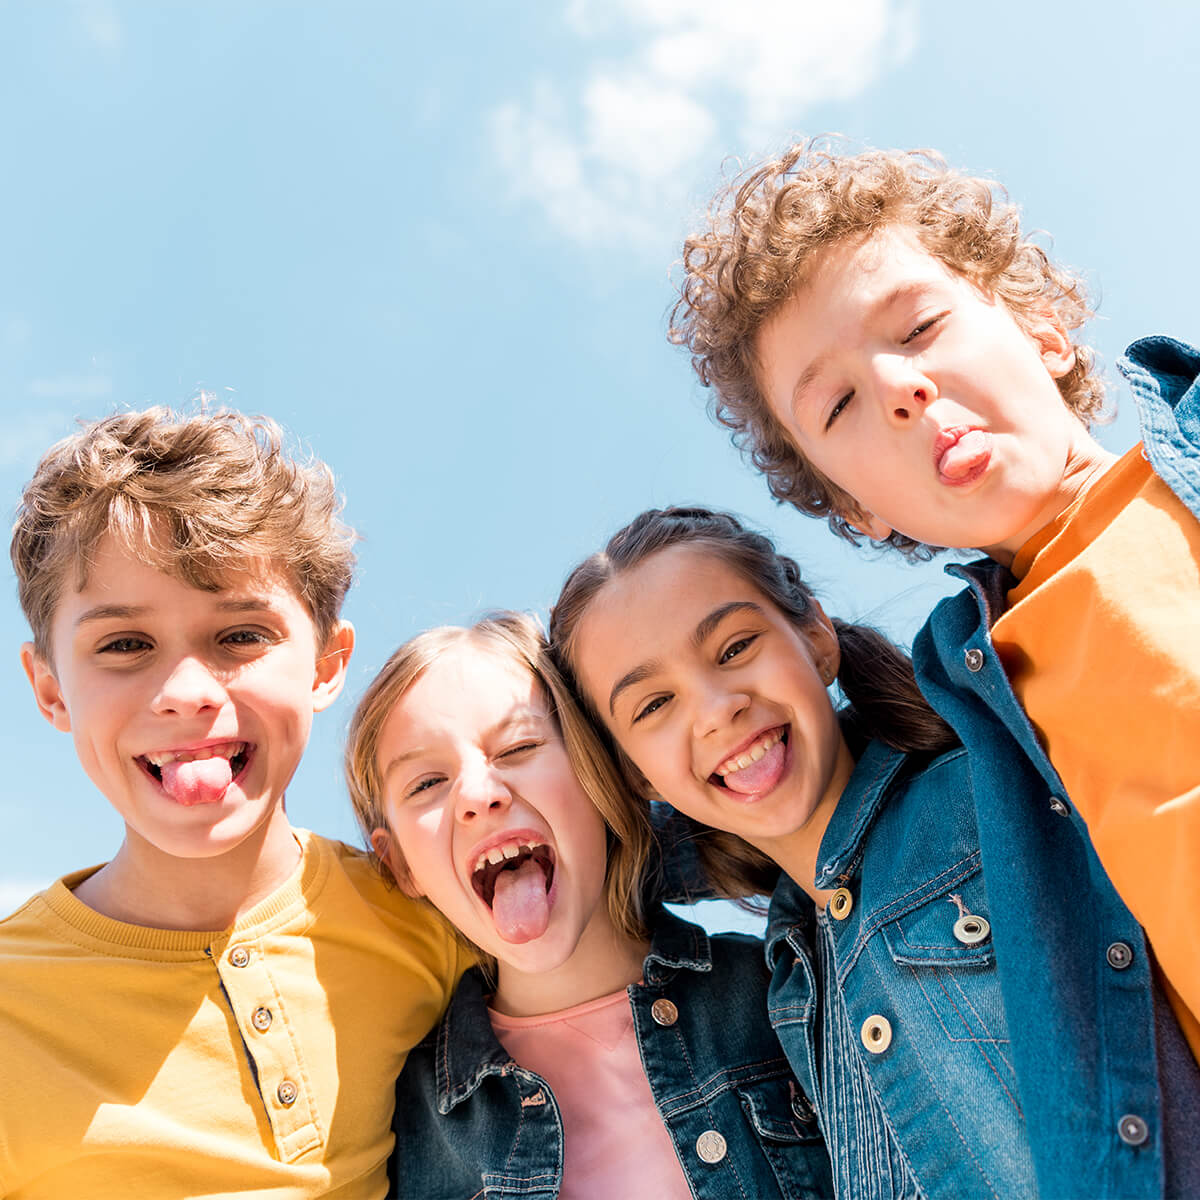 Root Canal Treatment for Children in San Antonio TX Area